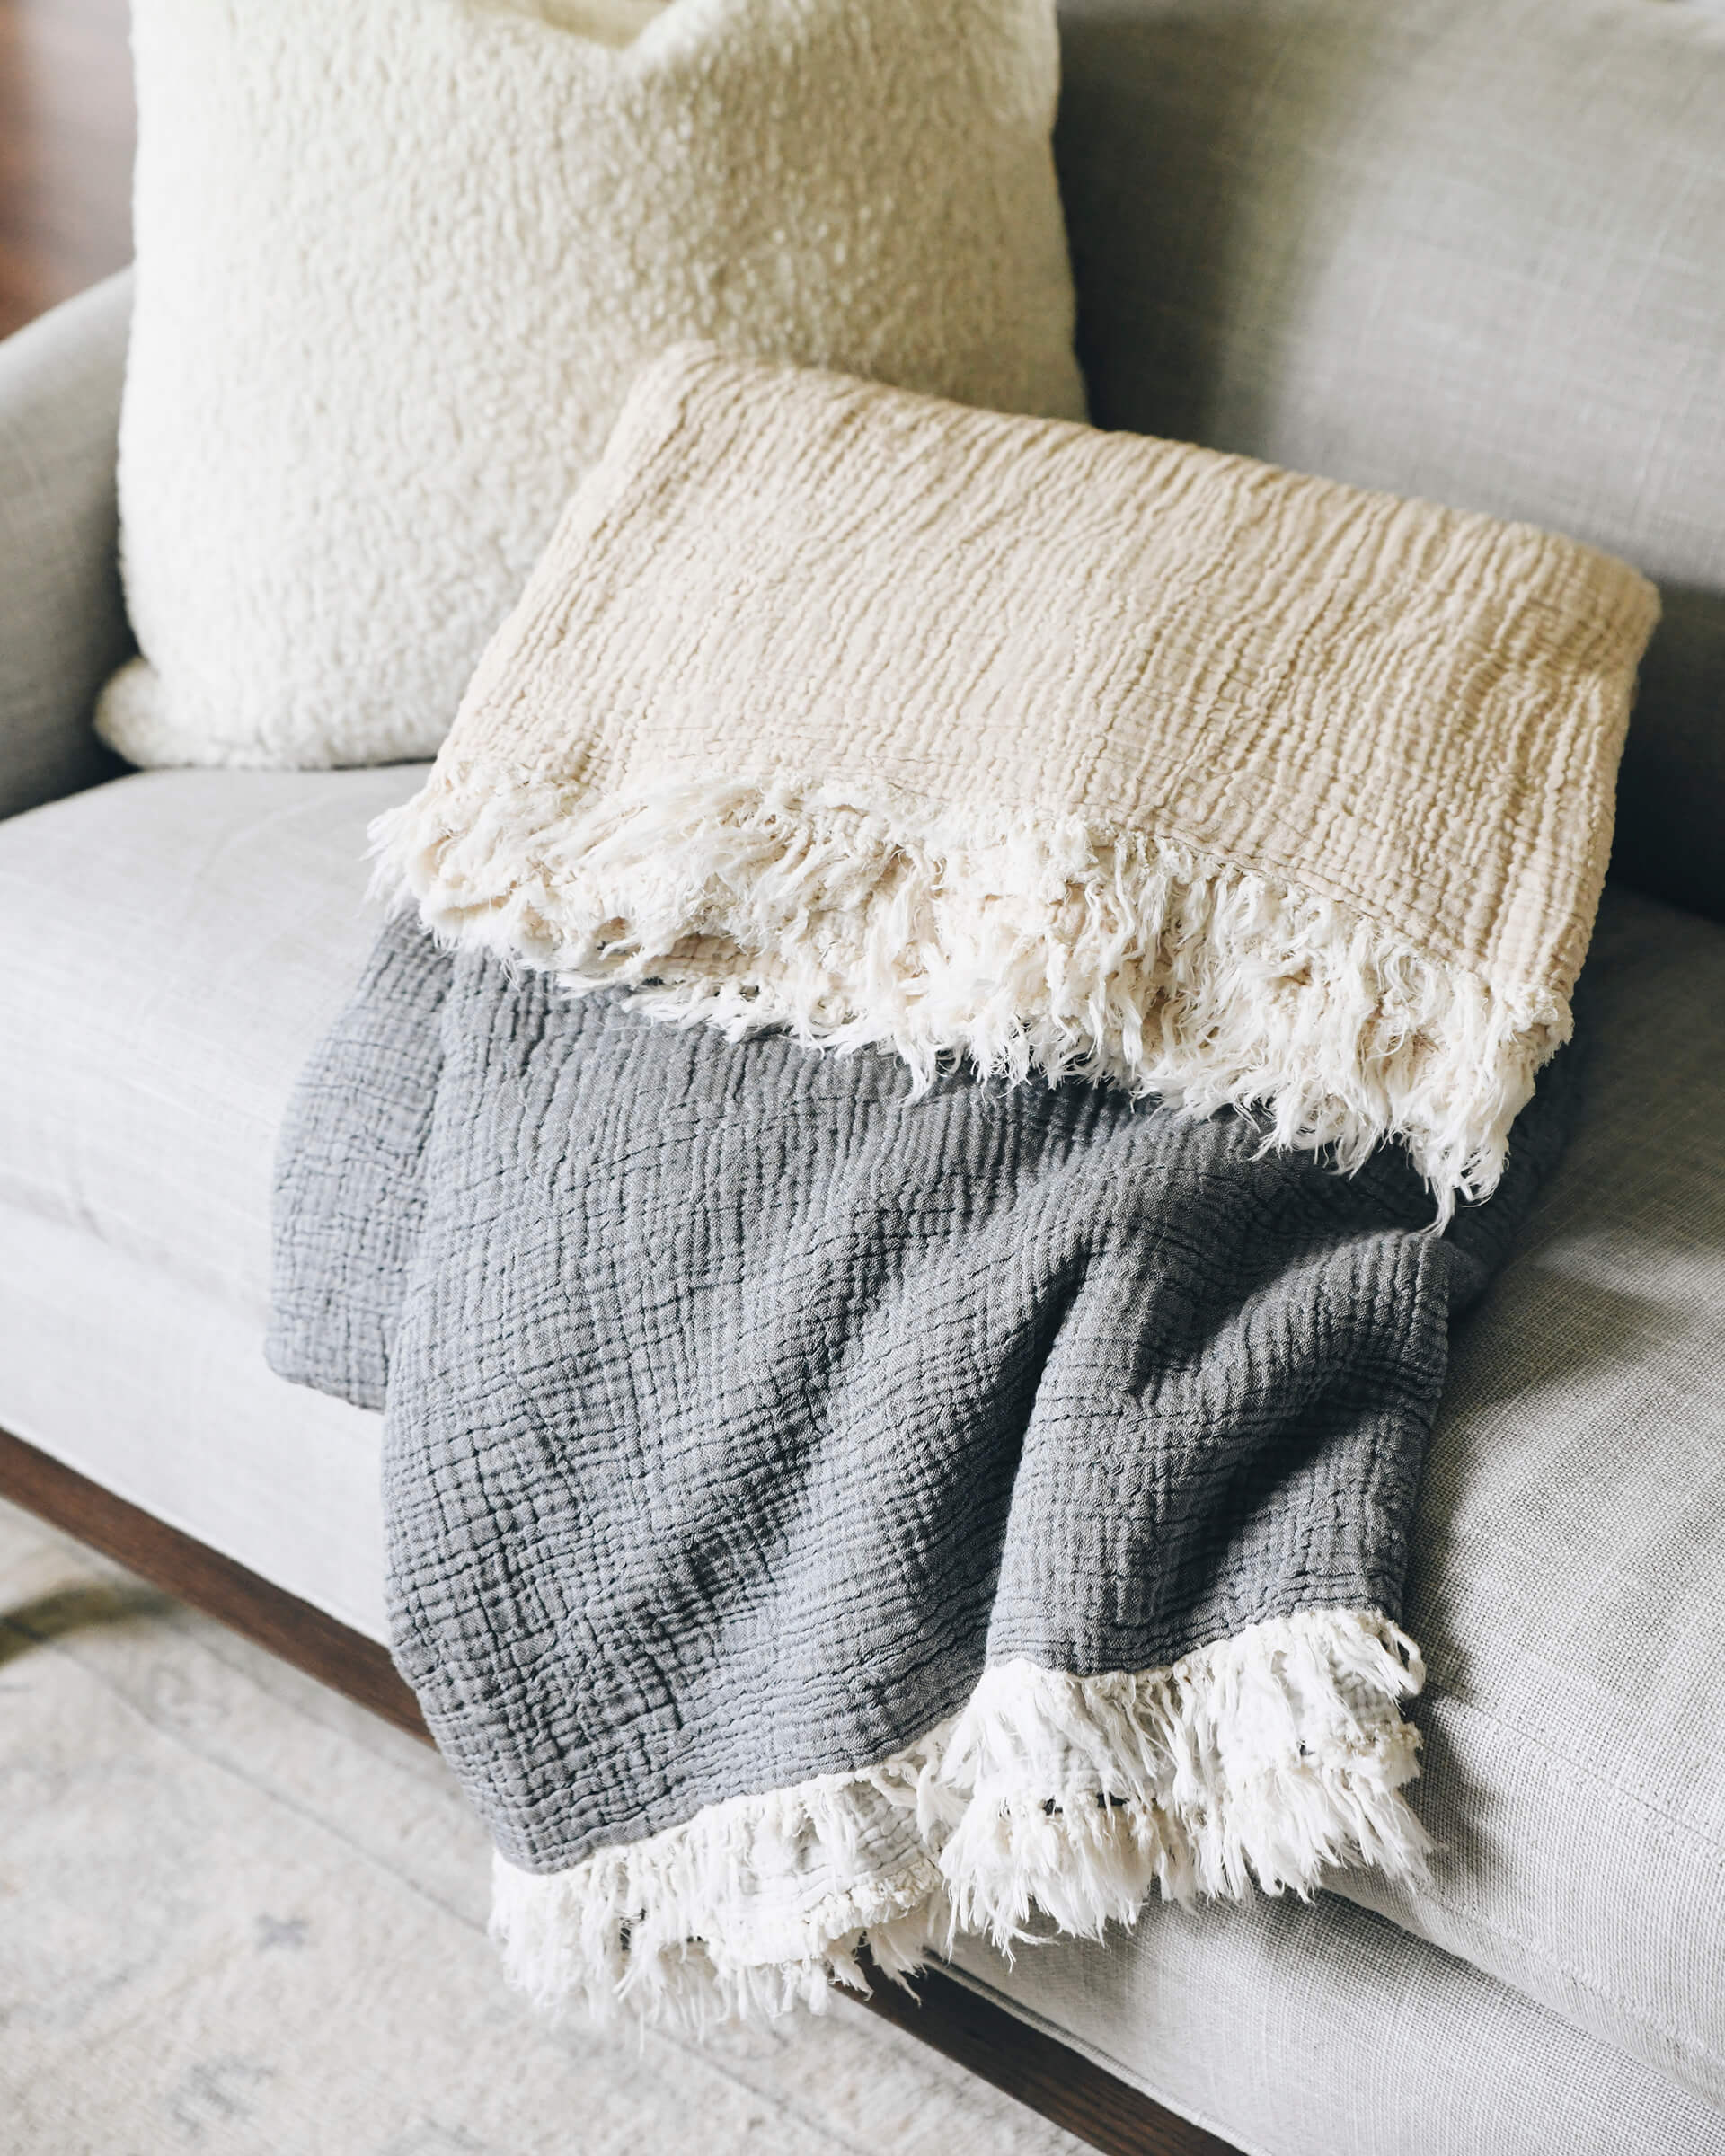 grey and light beige gauze blanket with white fringe detailing laying folded stacked on couch